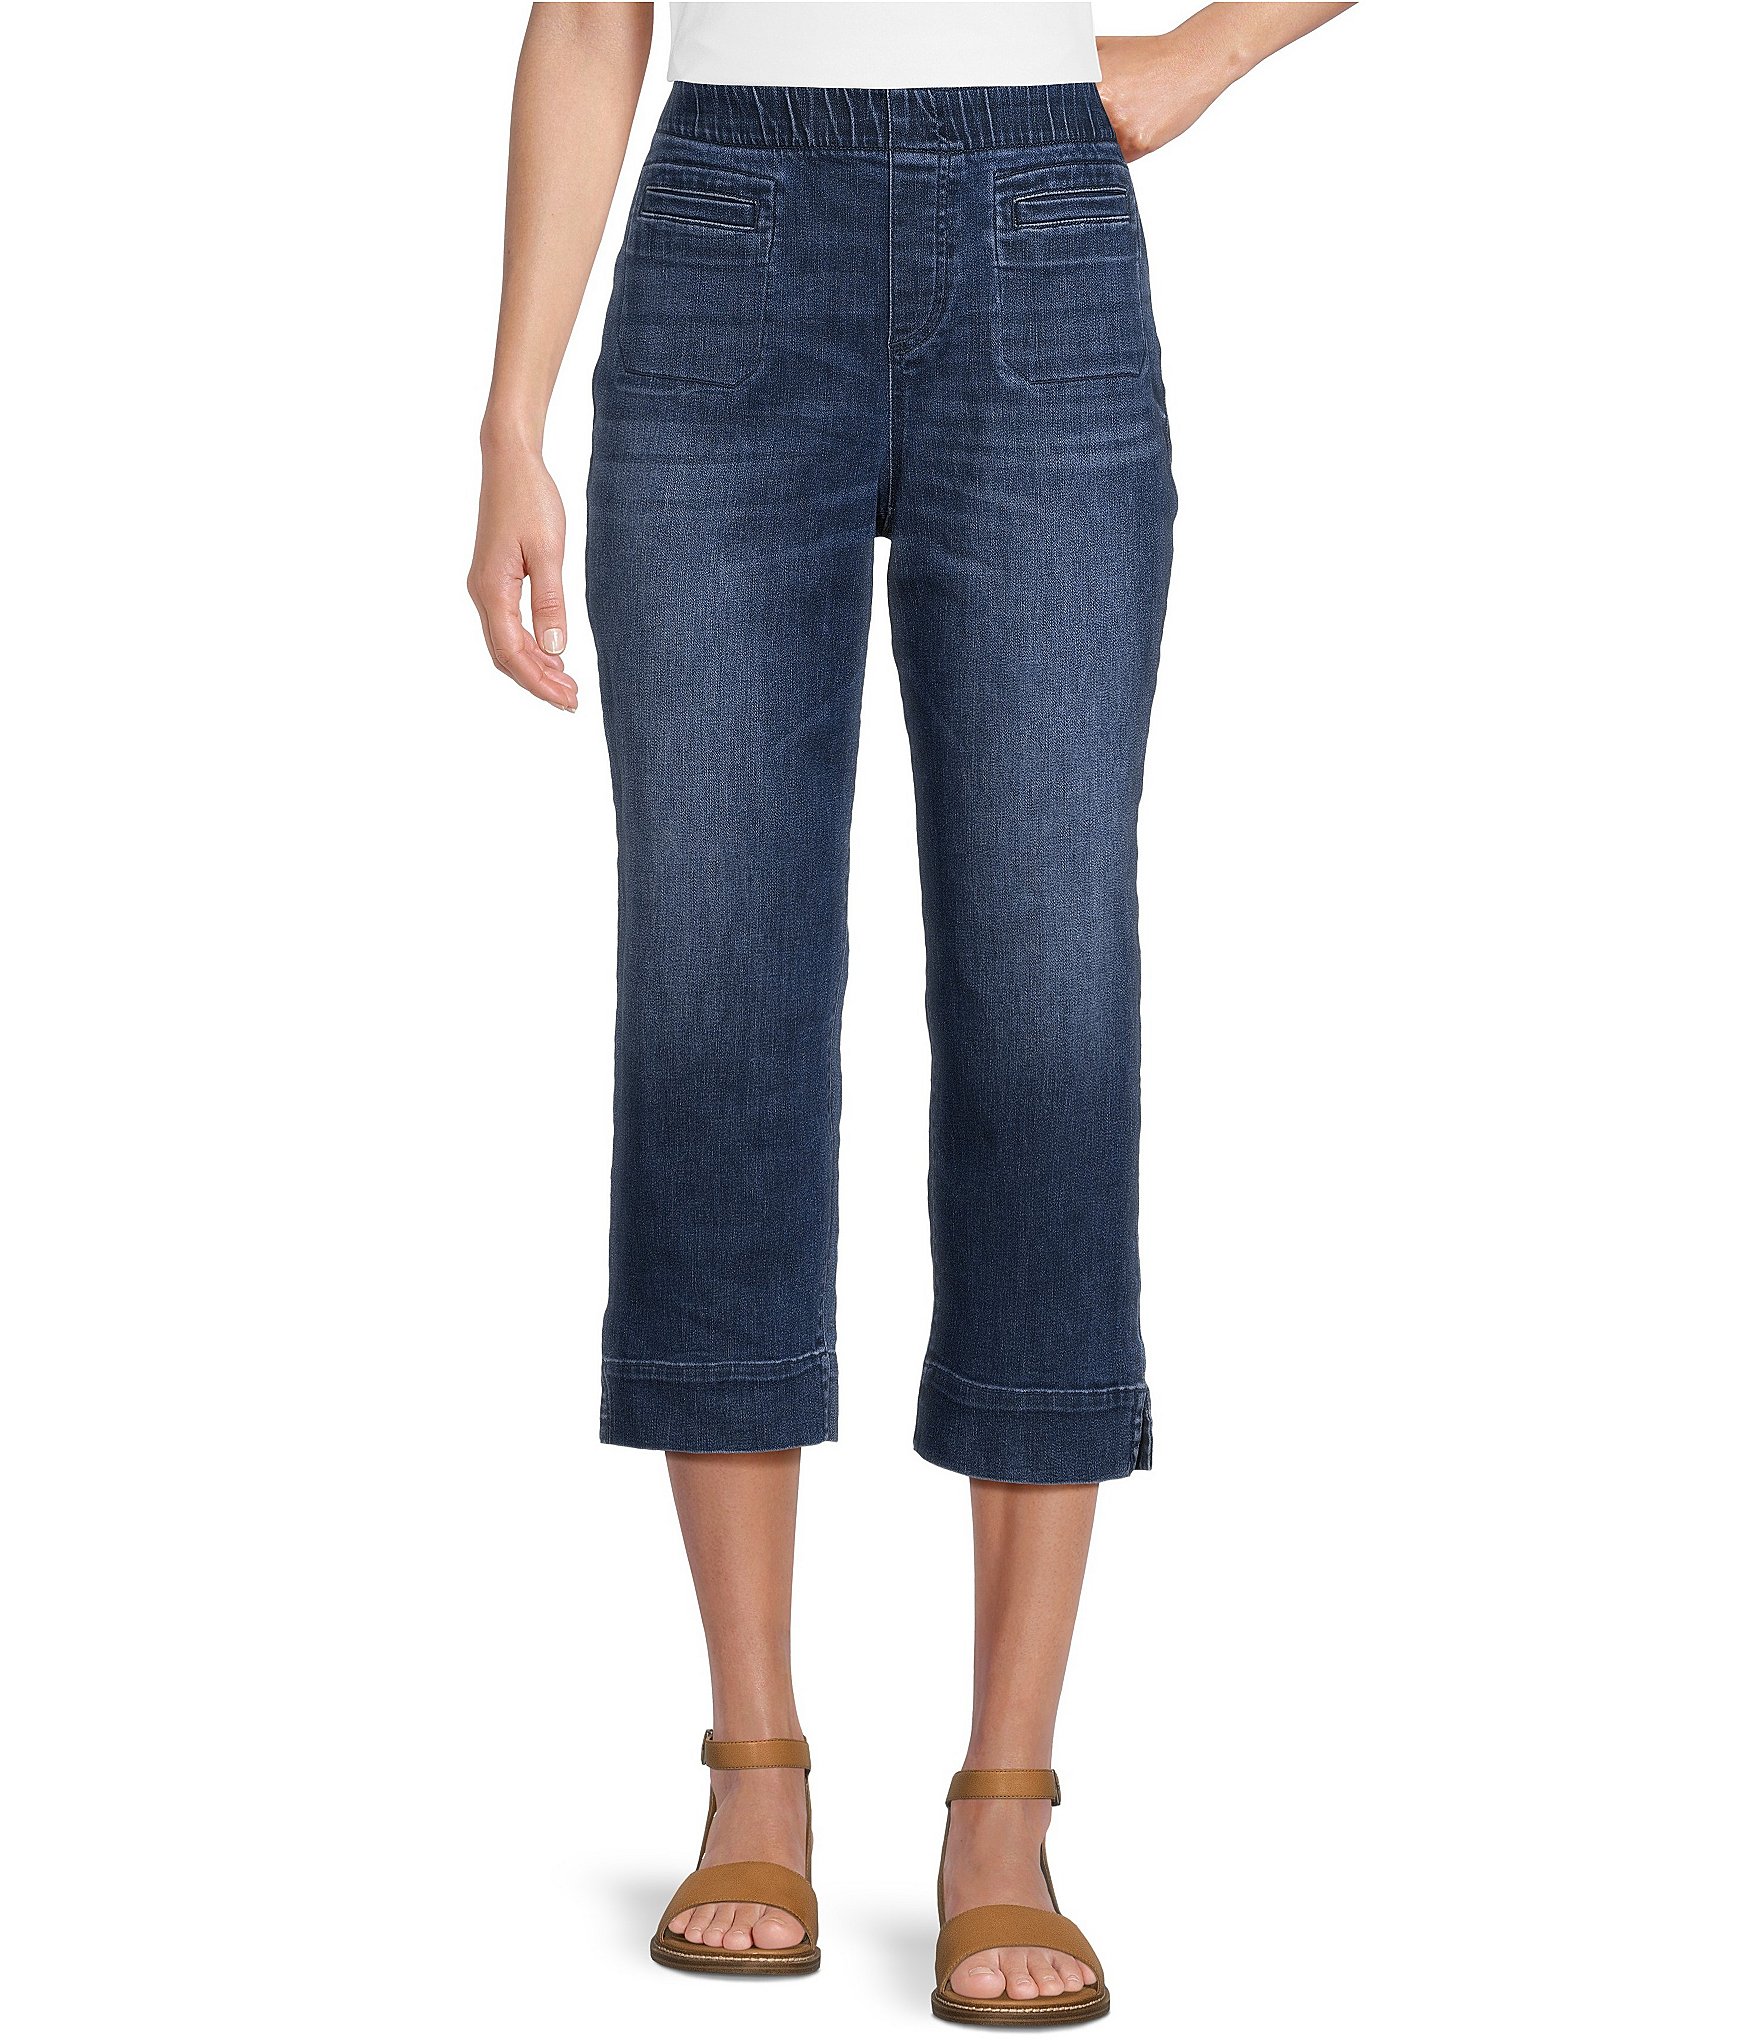 Westbound Petite Size Crop High Rise Pull-On Jeans | Dillard's